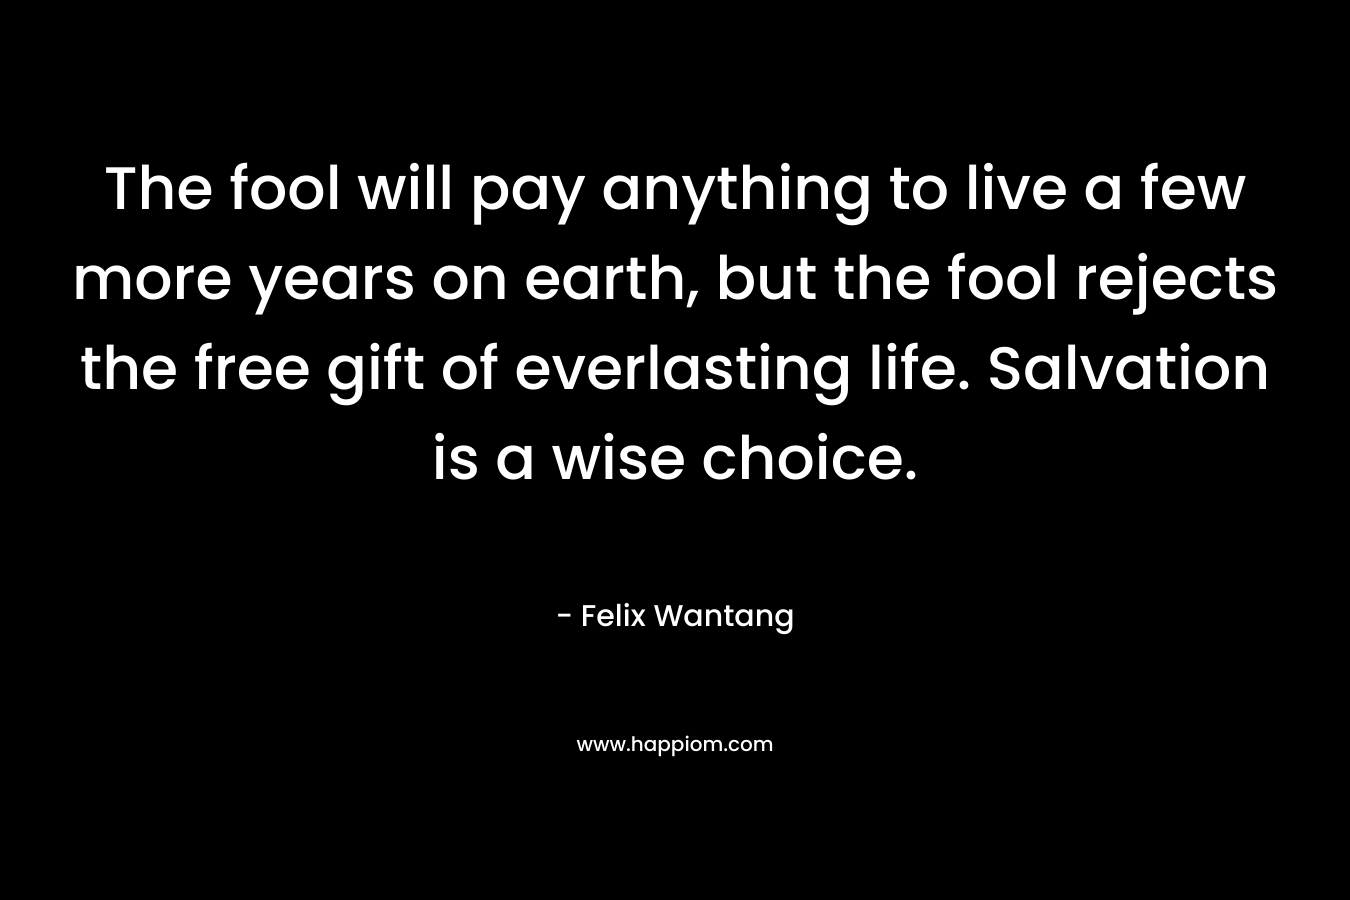 The fool will pay anything to live a few more years on earth, but the fool rejects the free gift of everlasting life. Salvation is a wise choice. – Felix Wantang